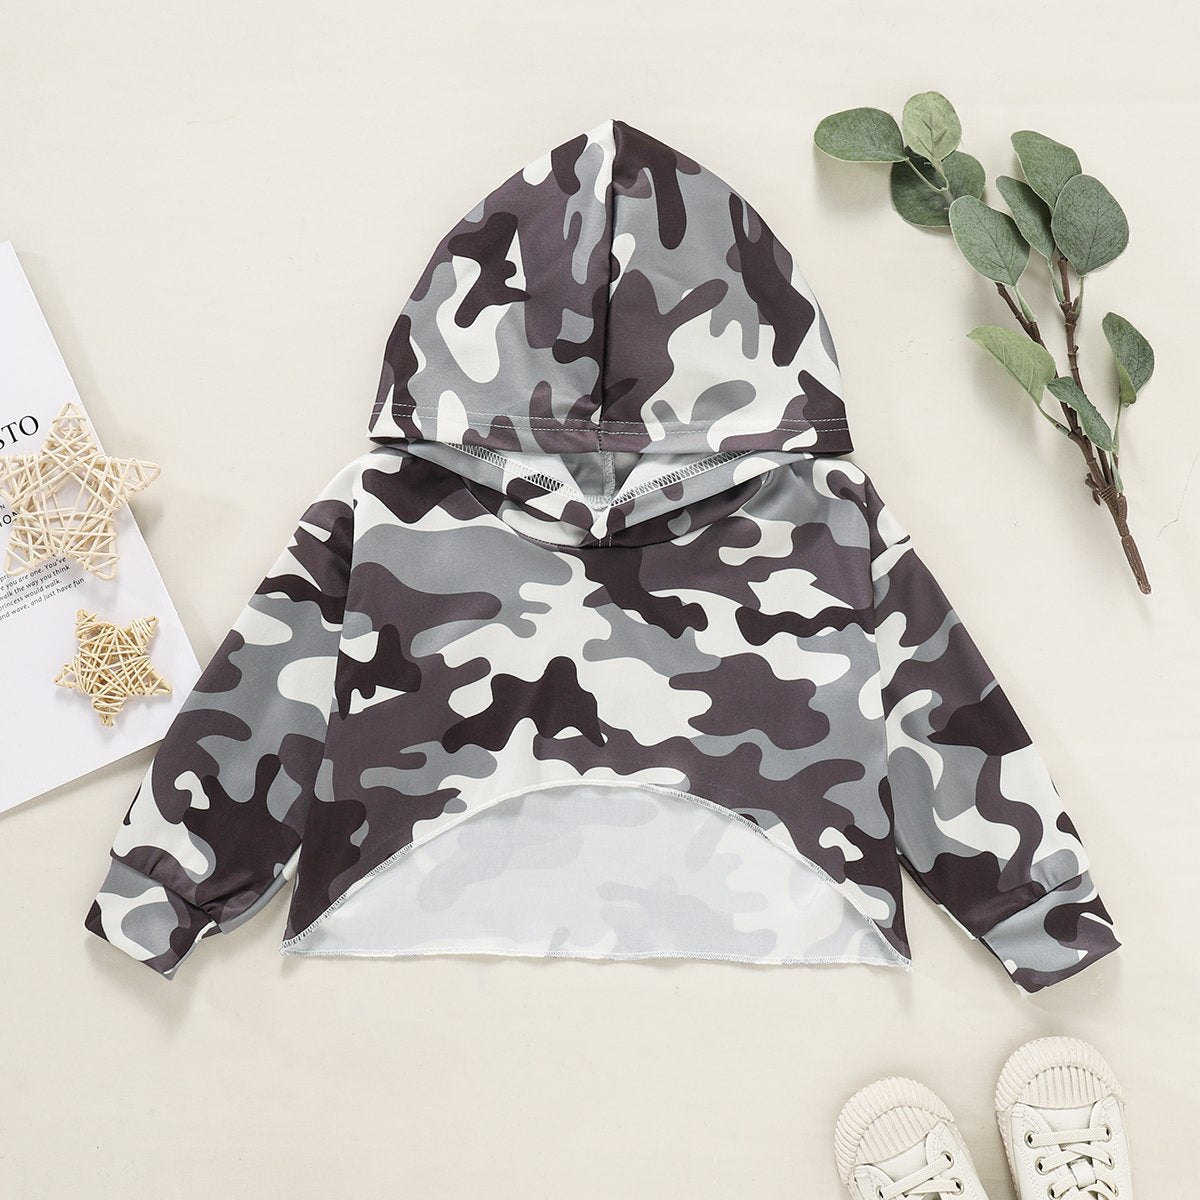 Girls Camouflage Hooded Long Sleeve Top wholesale kids clothes